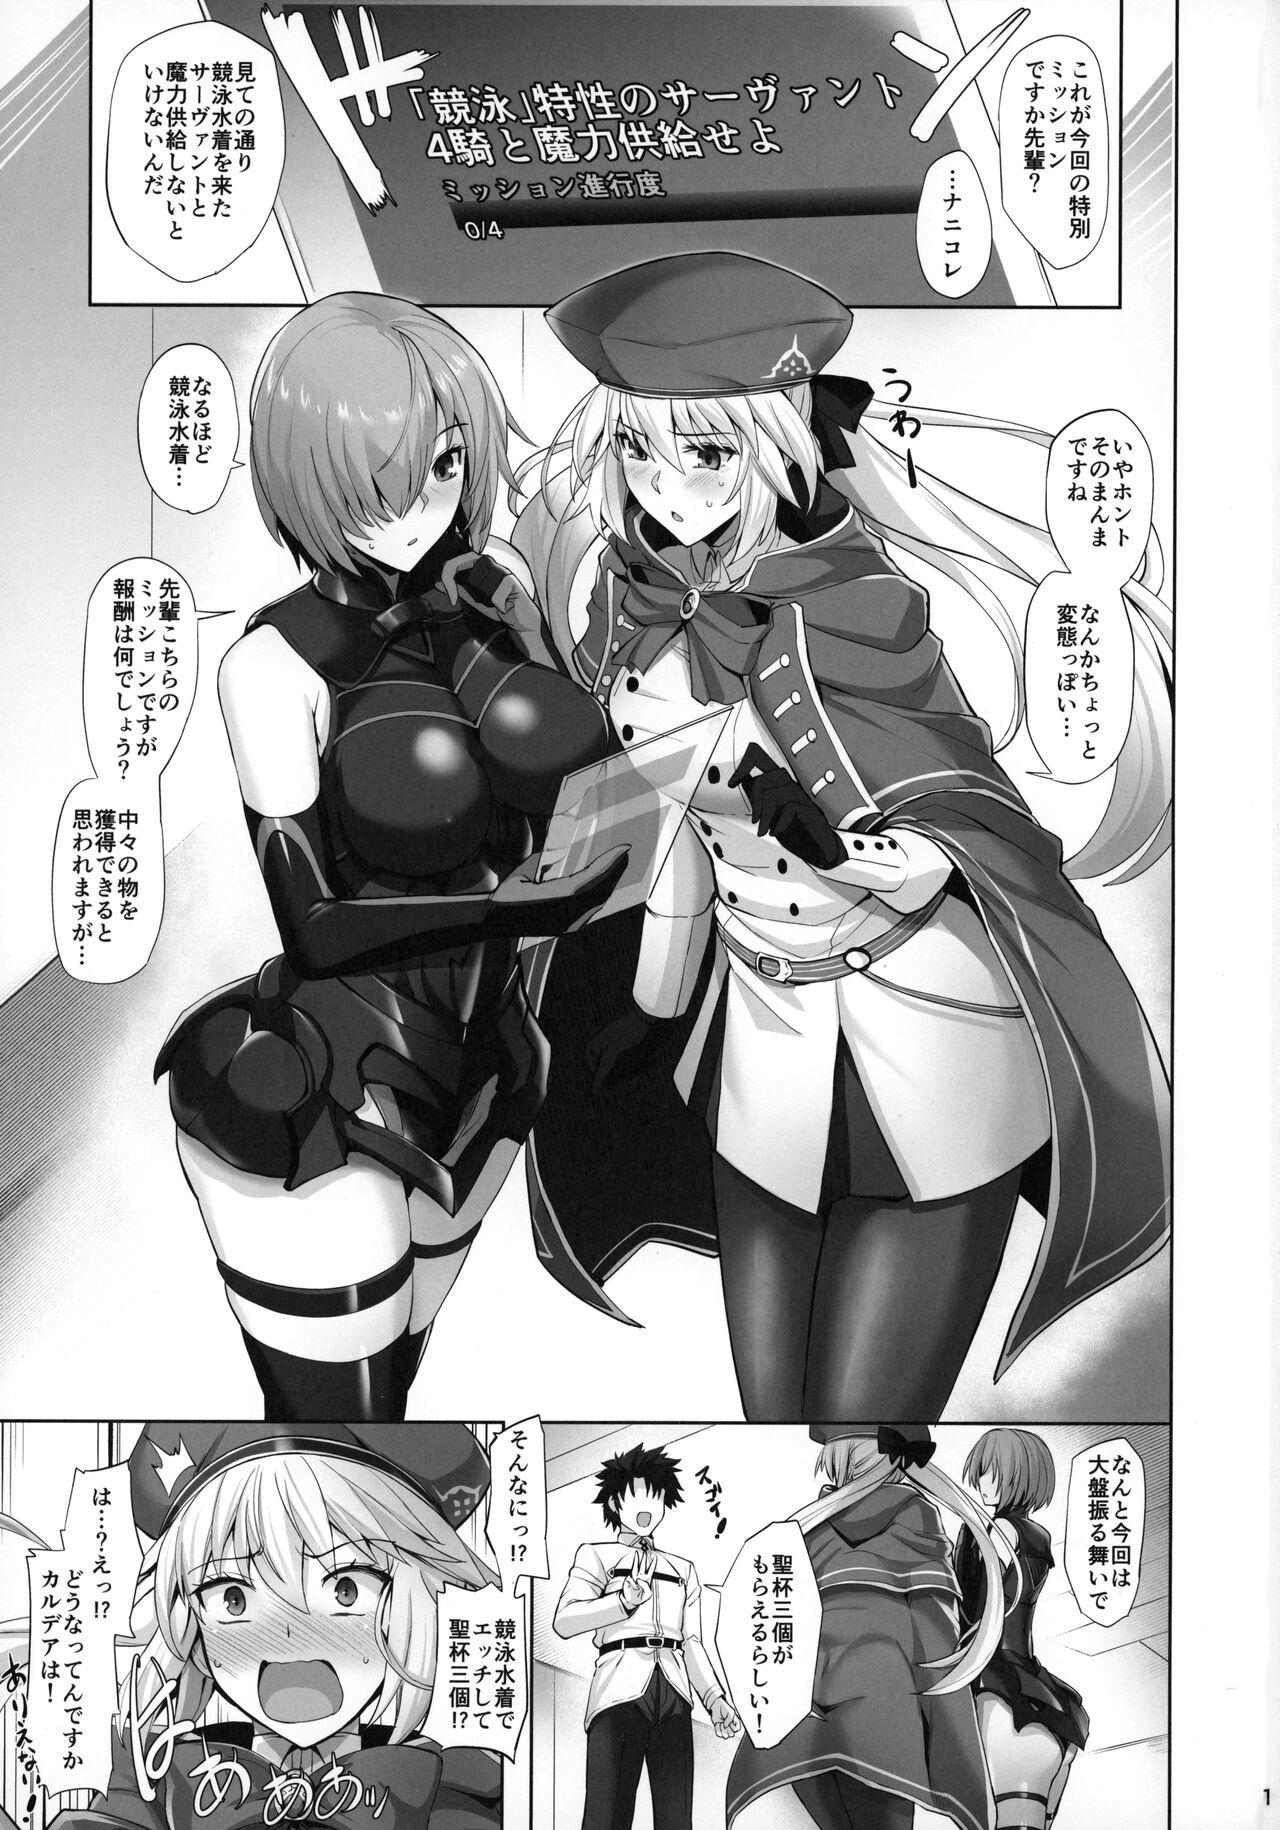 Gay Hunks Kyouei Tokusei no Servant to 2 - Fate grand order Ejaculations - Page 2